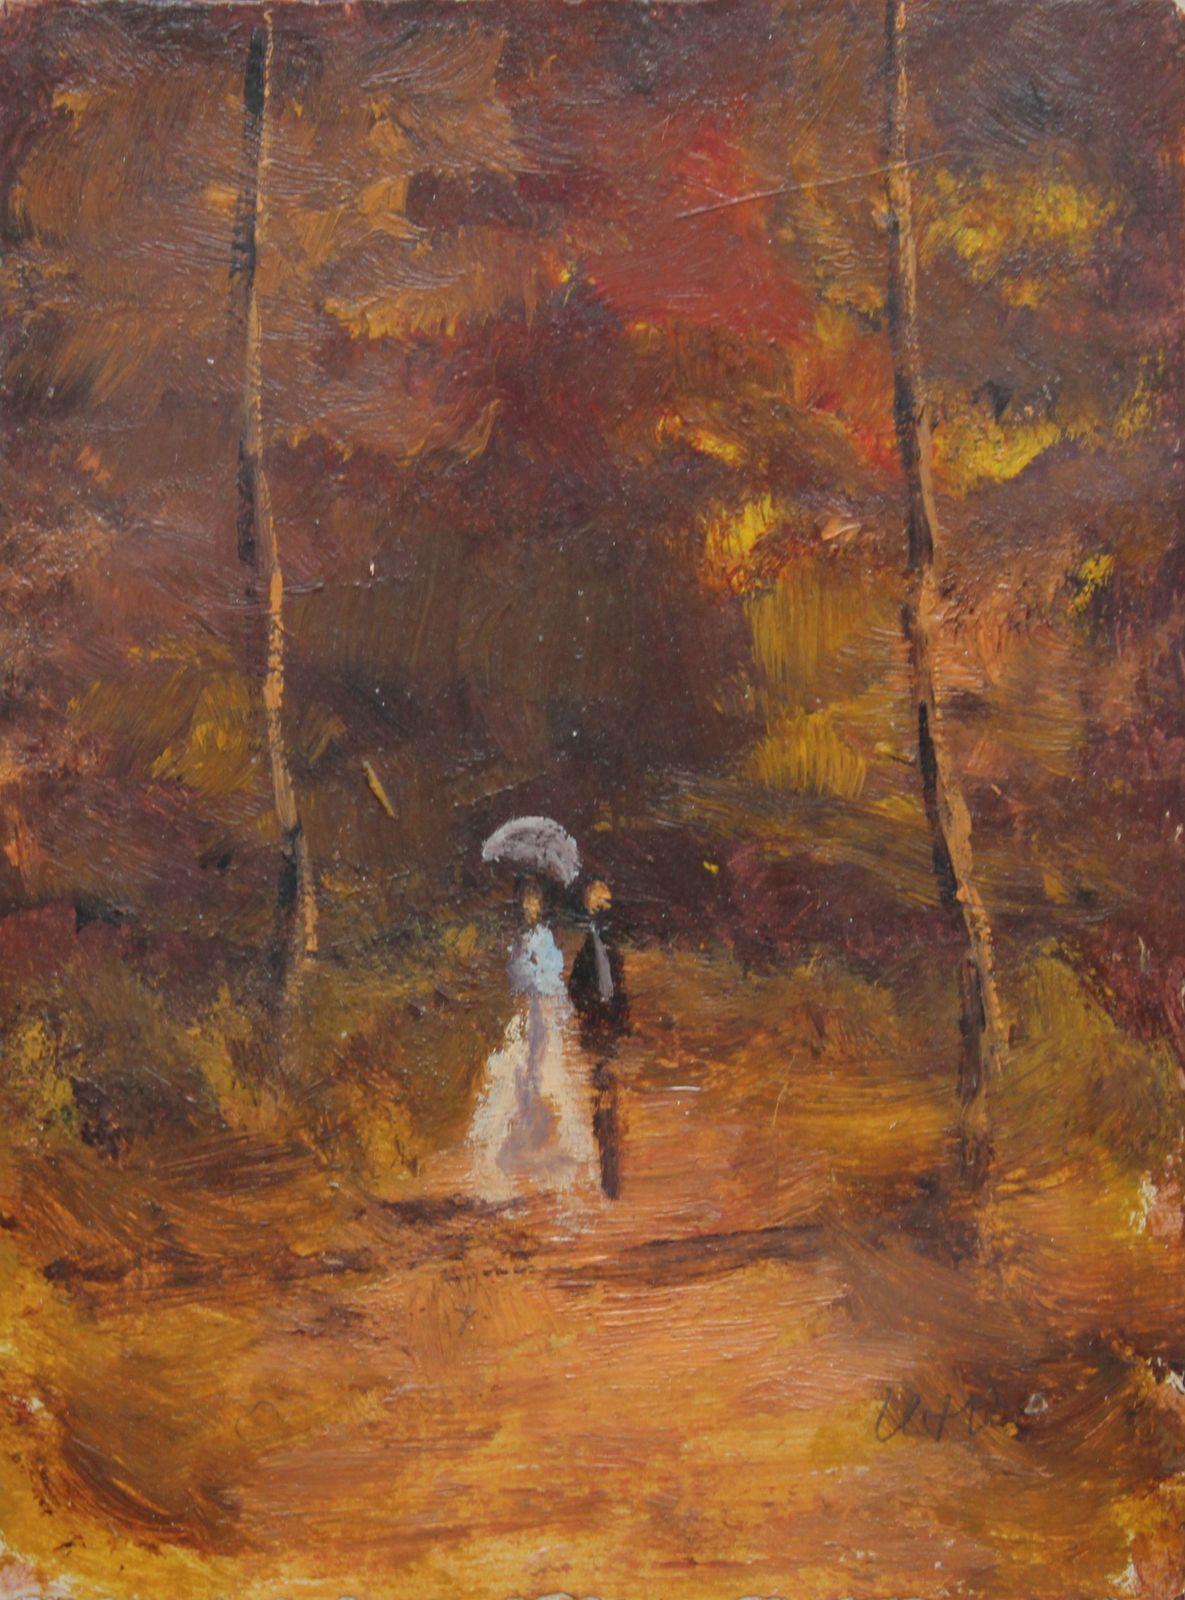 Antonio Leto Figurative Painting - A walk in the forest. Cardboard, oil. 8x6.2 cm